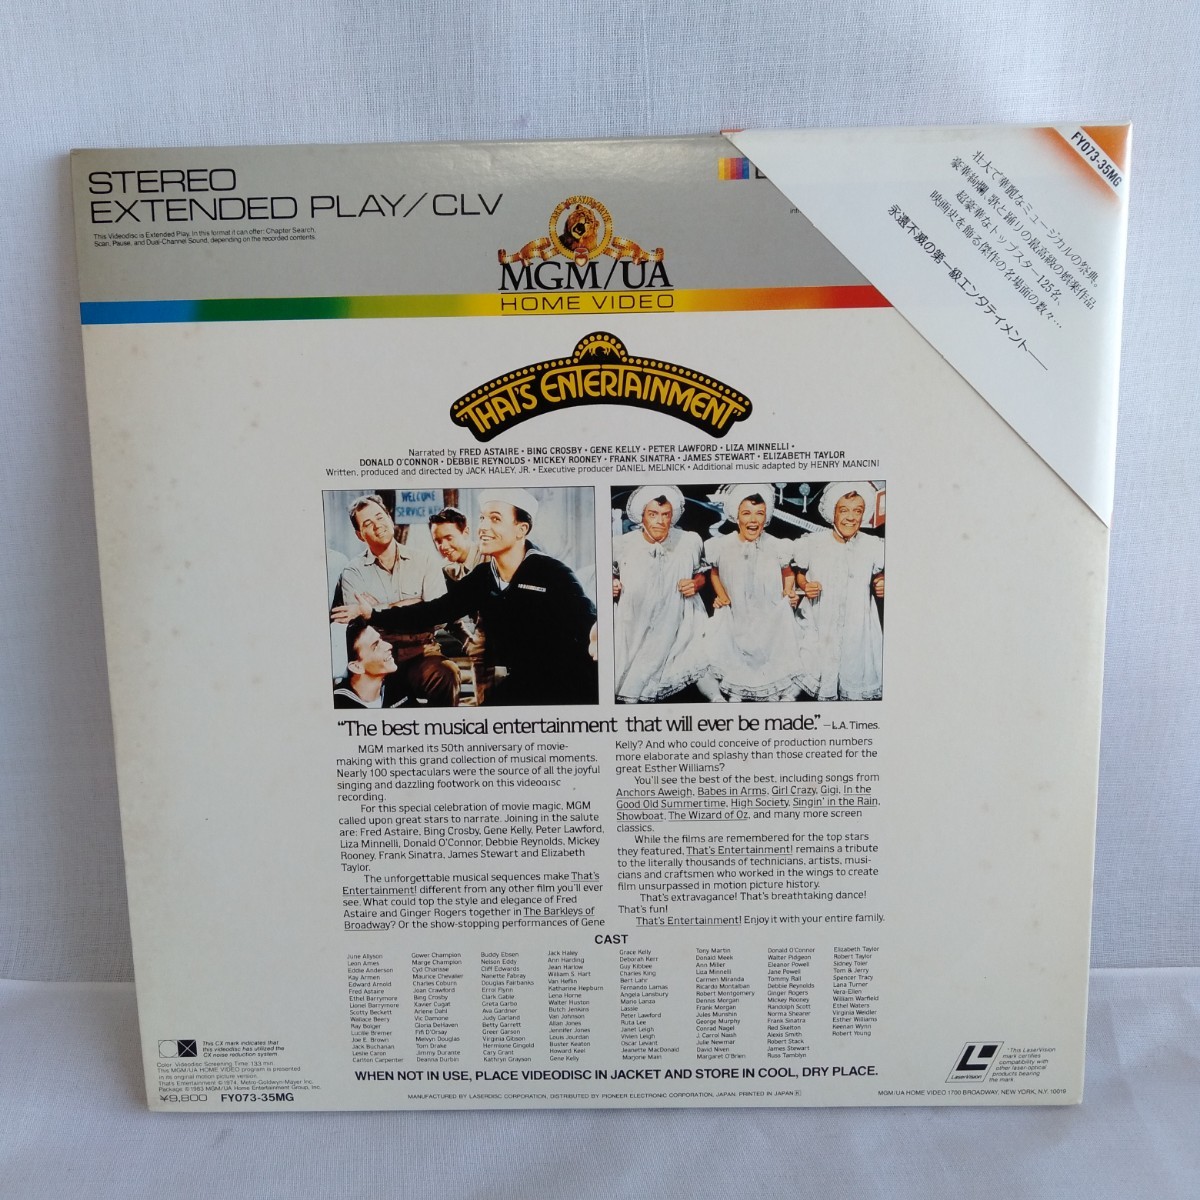 ta569 THAT\'S ENTERTAINMENT Thats * entertainment laser disk LD what sheets also uniform carriage 1,000 jpy reproduction not yet verification 